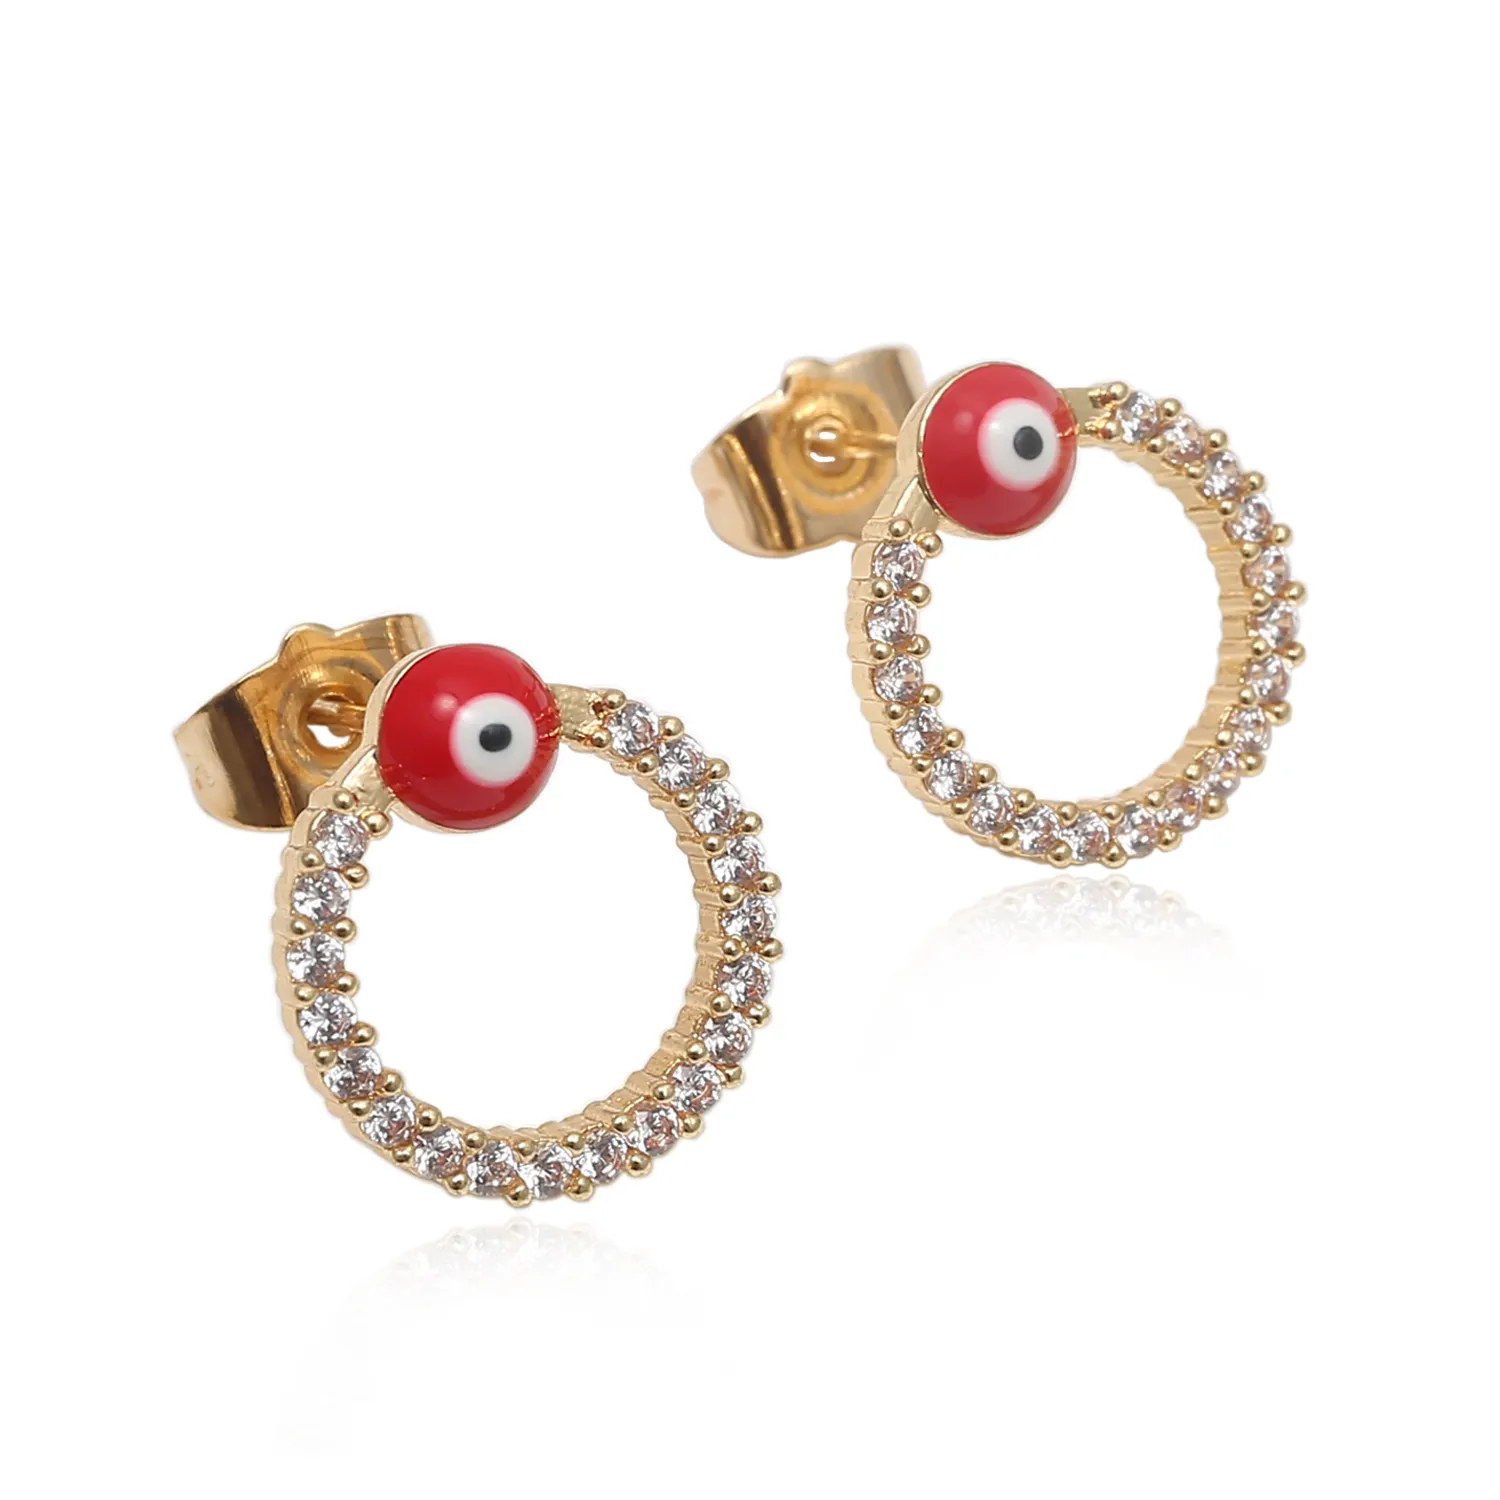 Wholesale low price earrings inspired fashion evileye cubic 14K gold plated zirconia cute jewelry evil Ear studs Pendientes